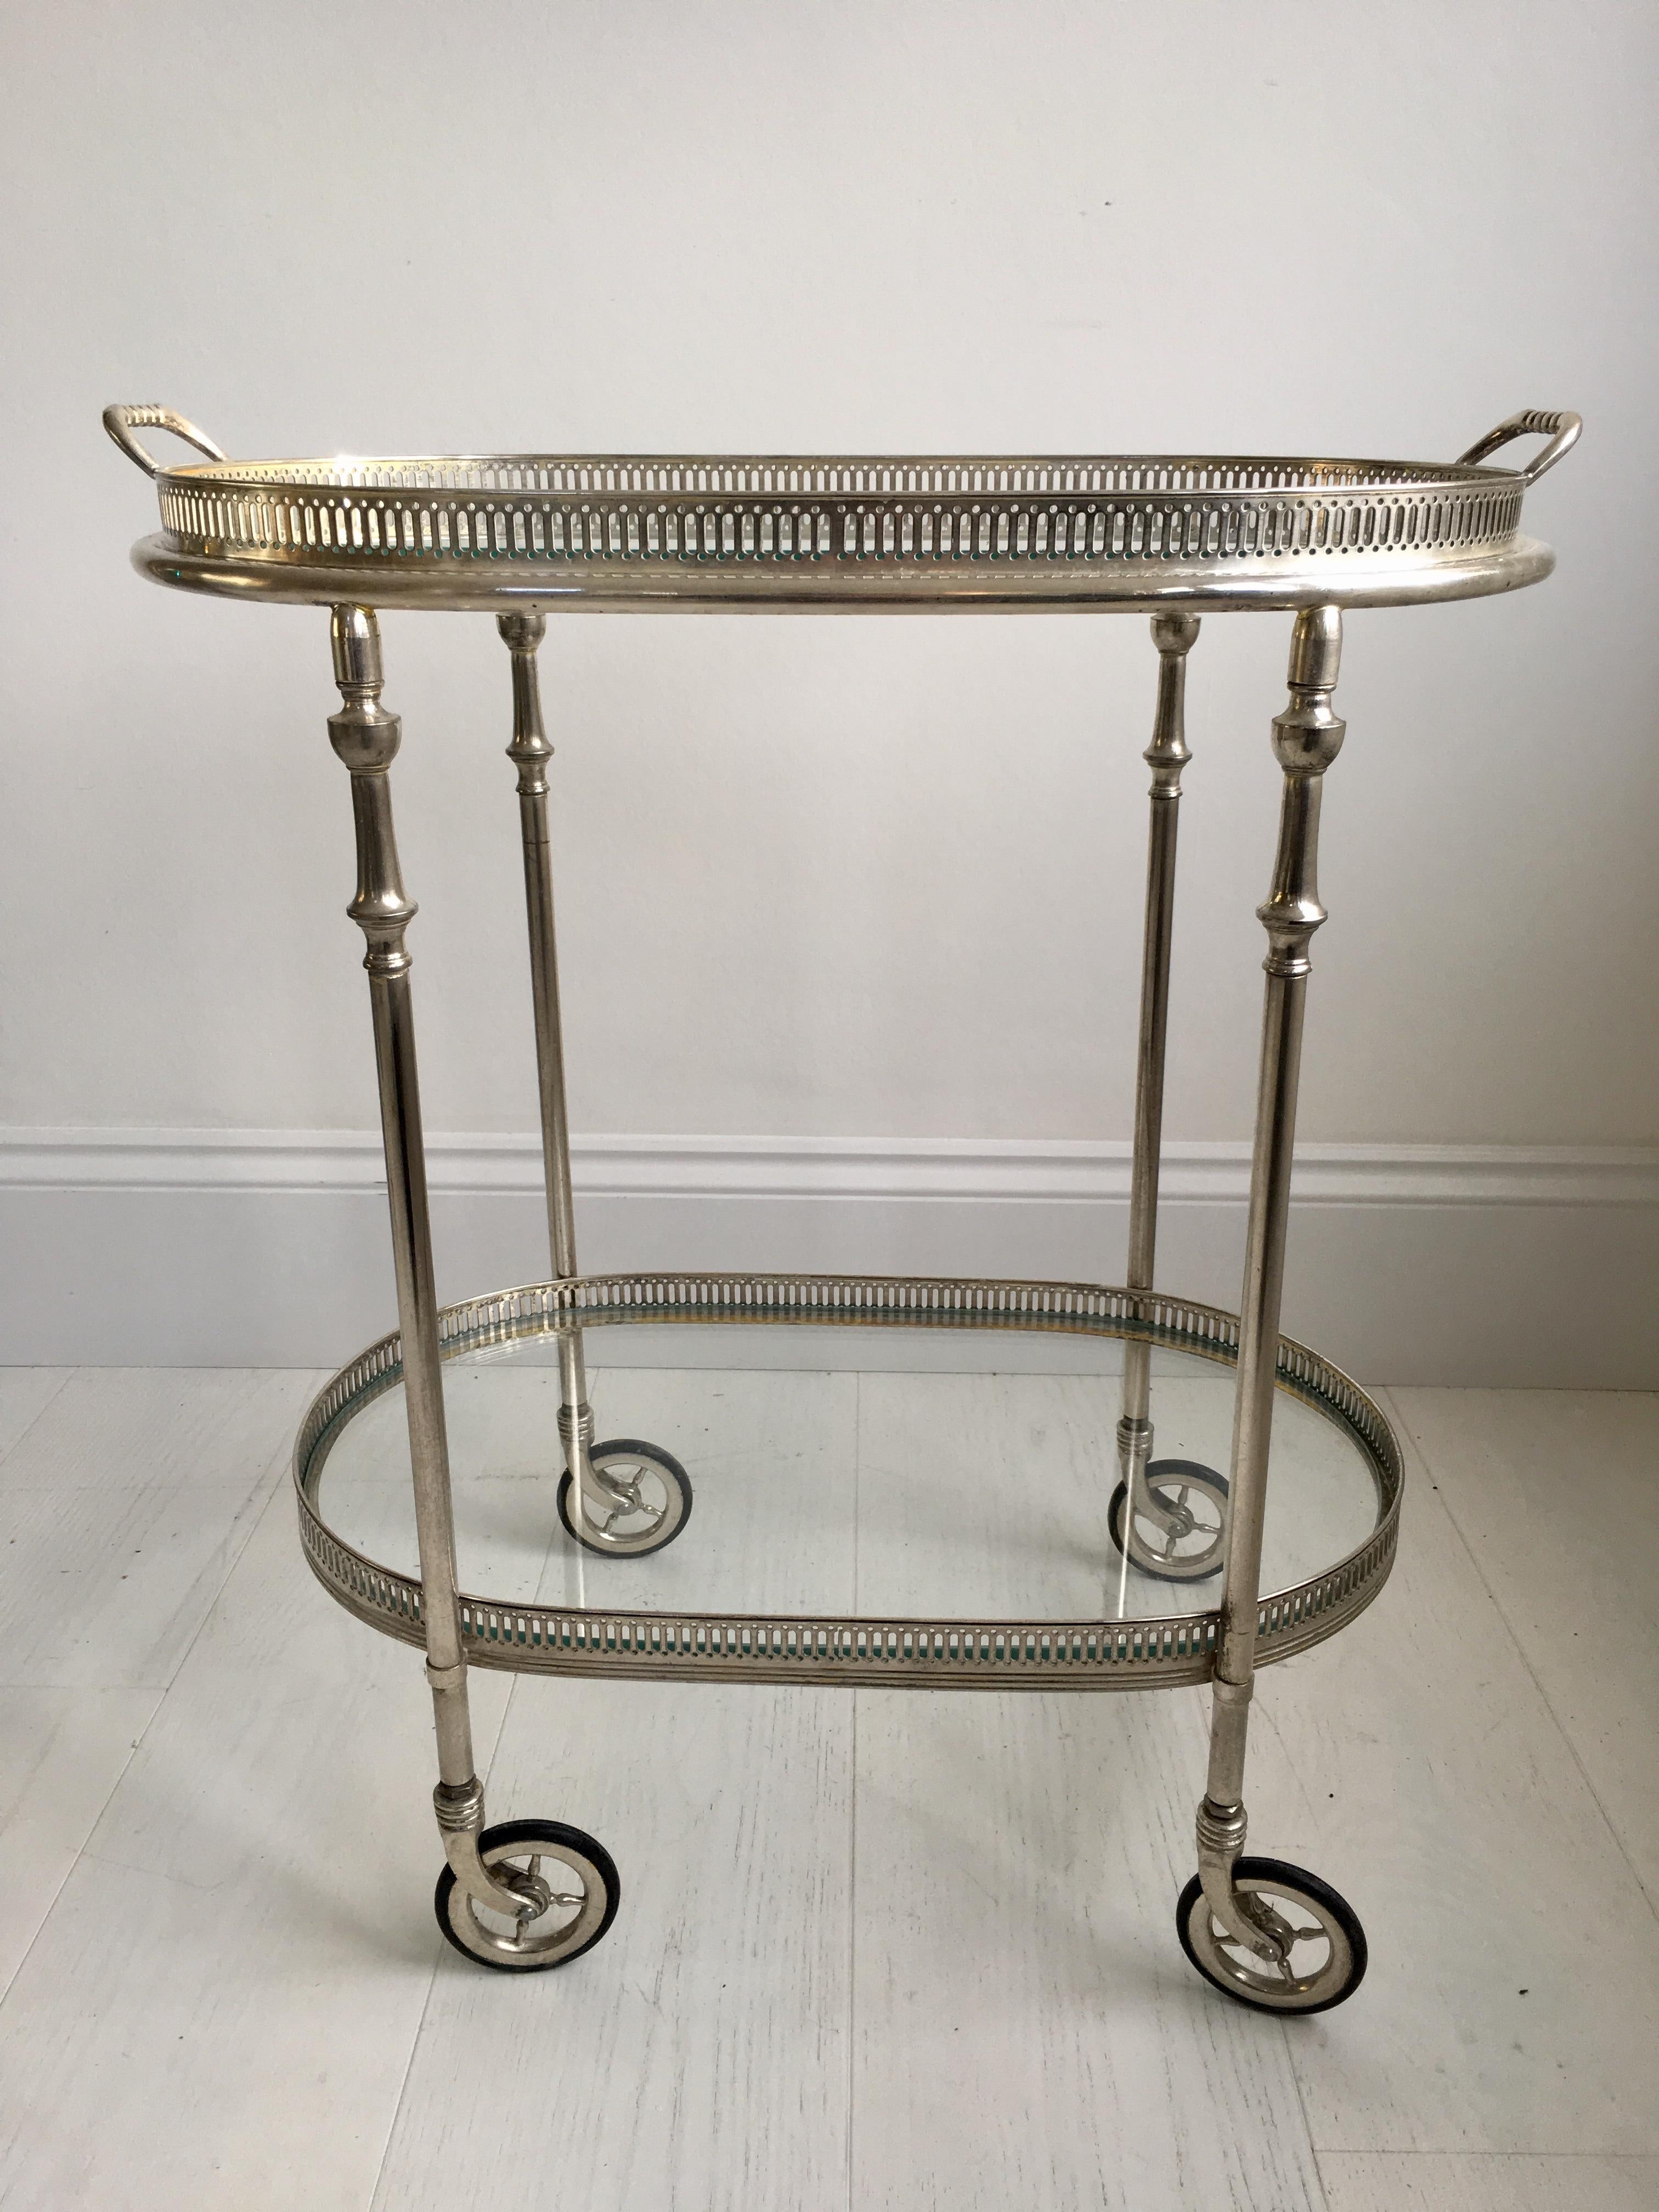 Vintage drinks trolley from France, circa 1950.

Polished silver frame with lift off top tray.

Perfect for smaller spaces.

Overall dims 55cm wide (incl handles), 34cm deep and 63cm tall (60cm to glass).